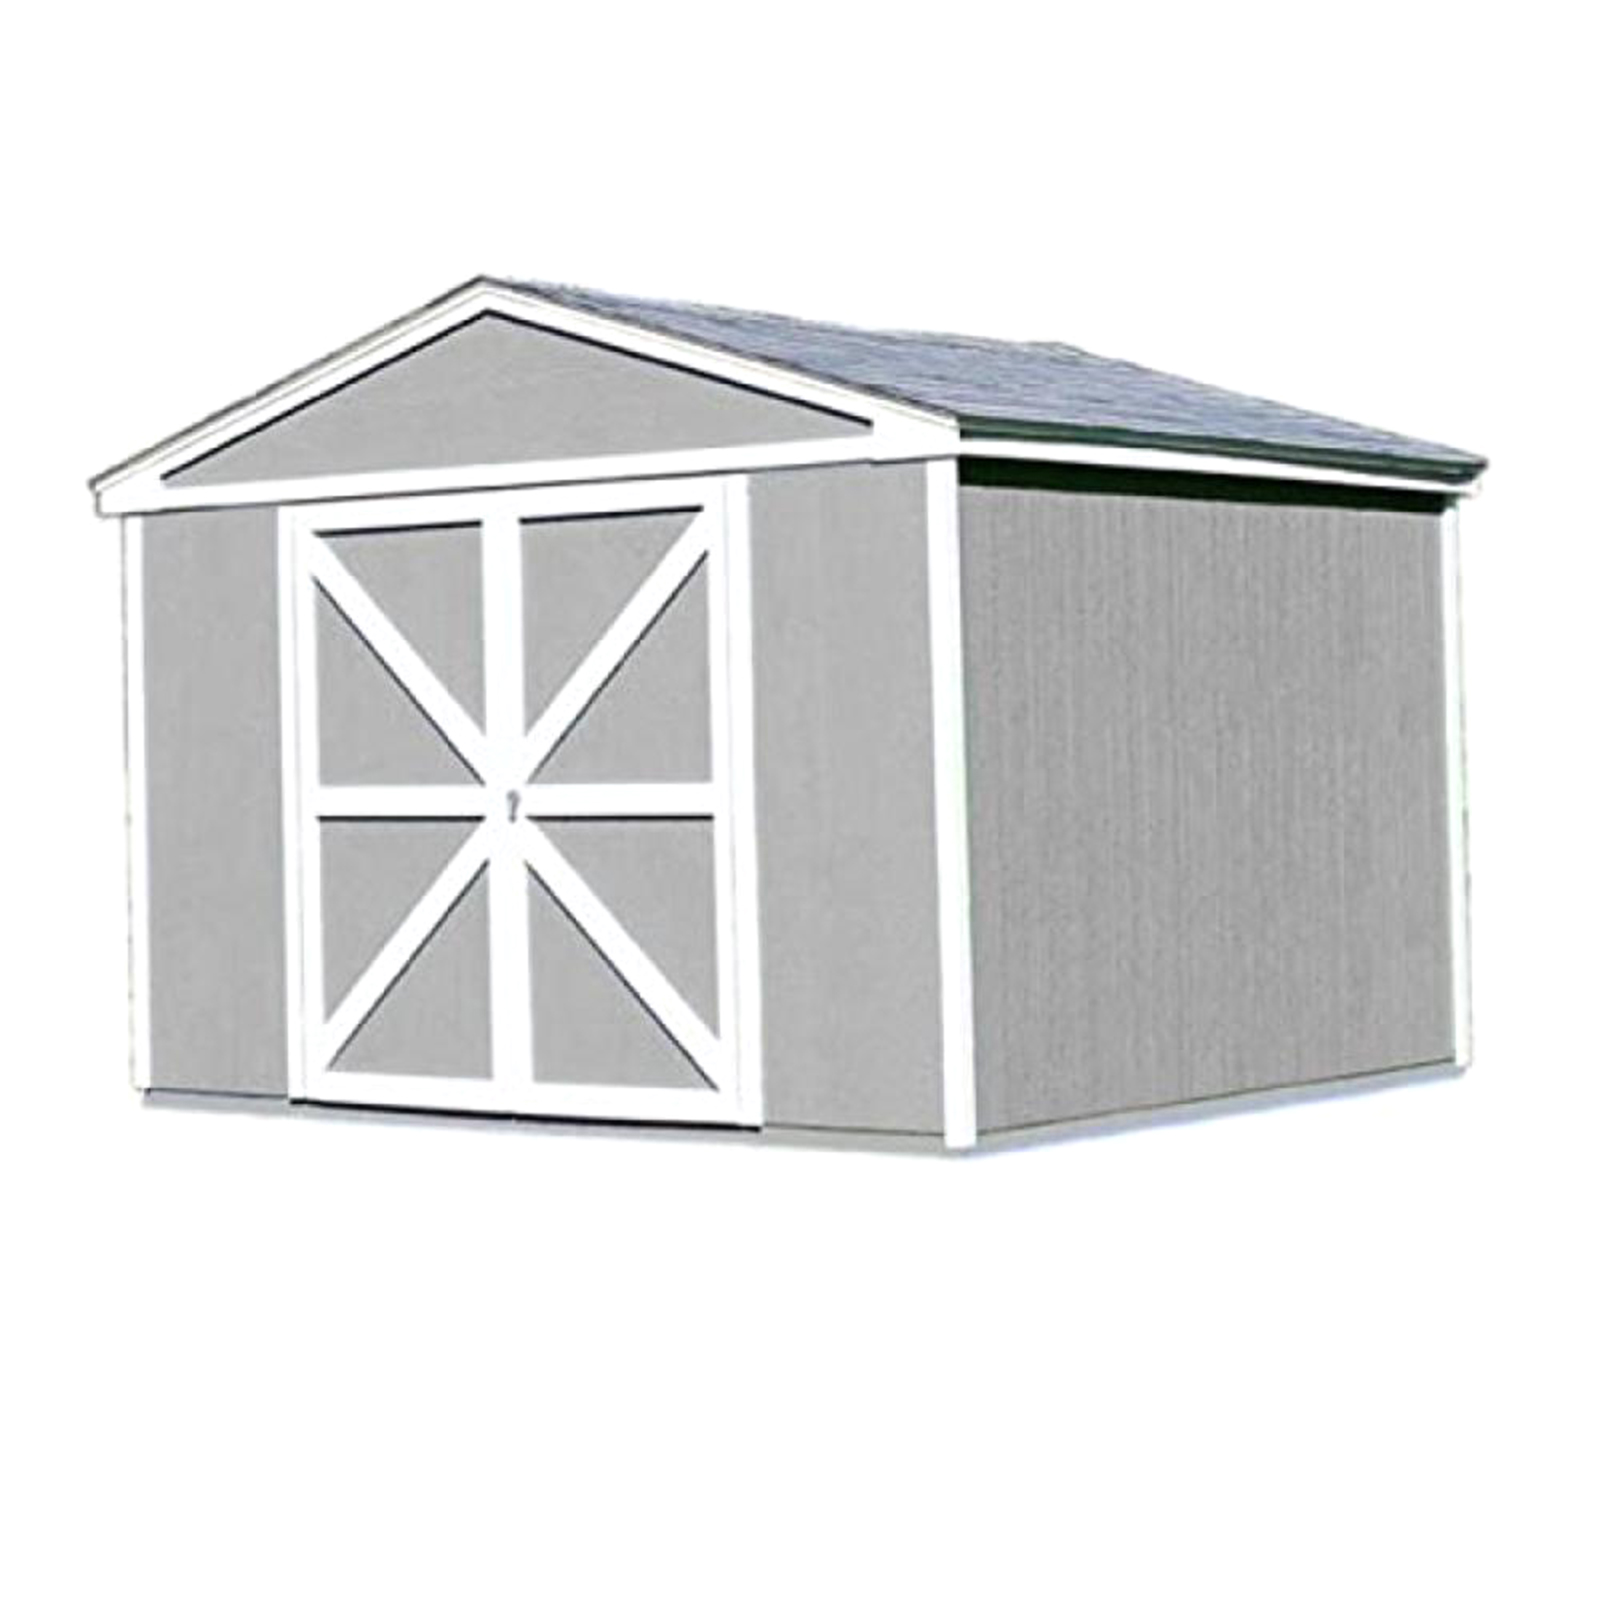 Handy Home Products 18501-4 Somerset 10' x 8' Wooden Storage Shed